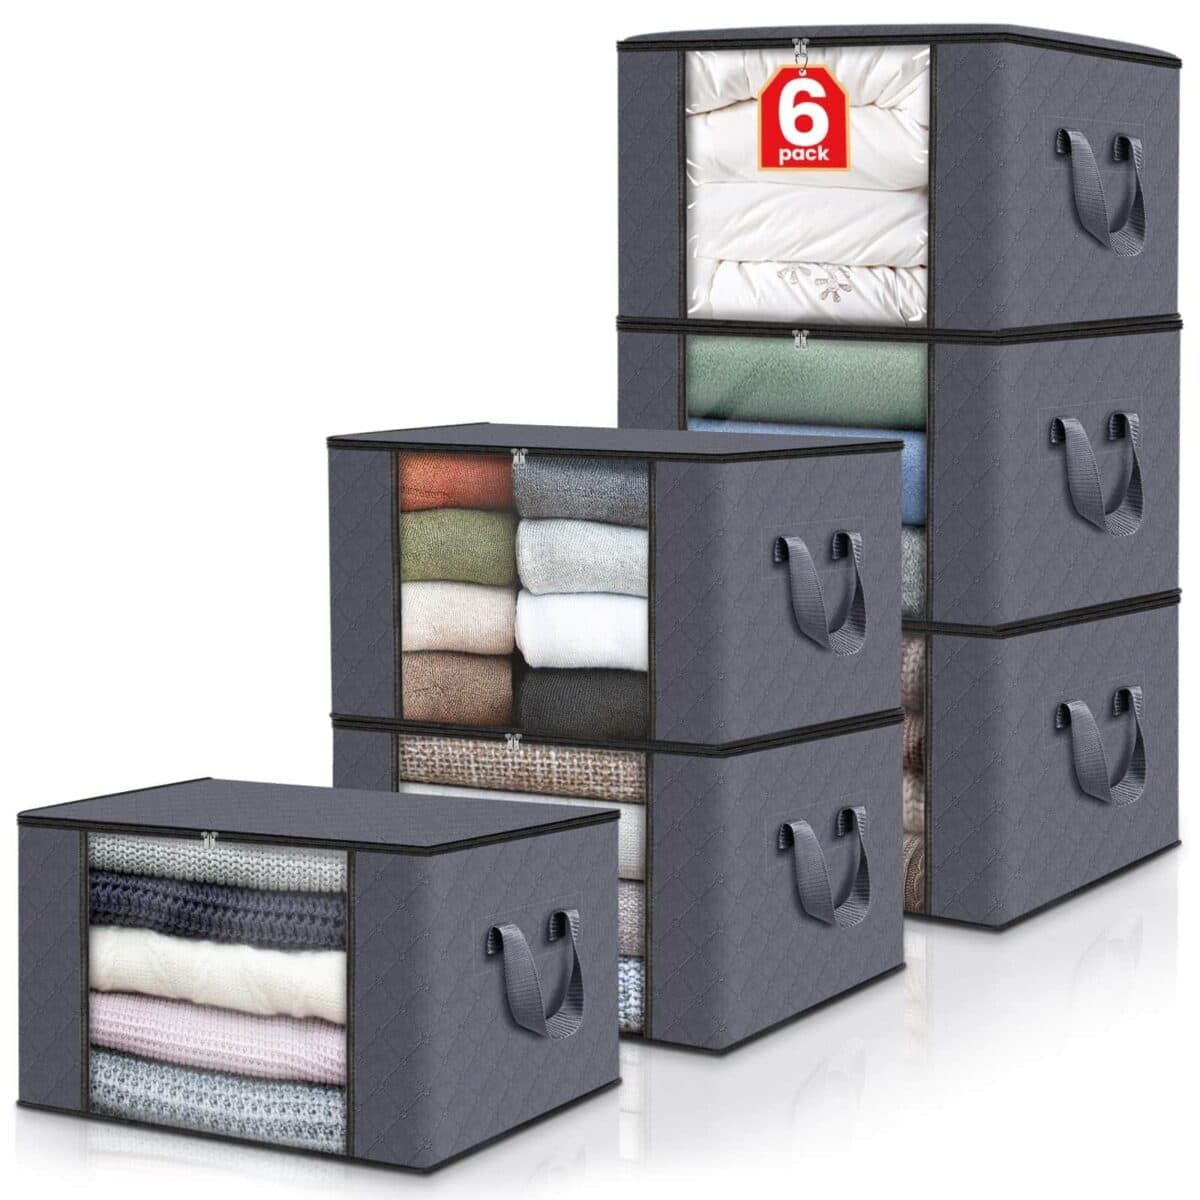 What You Should Know About Fab's Clothes Storage Totes Before You Buy ...